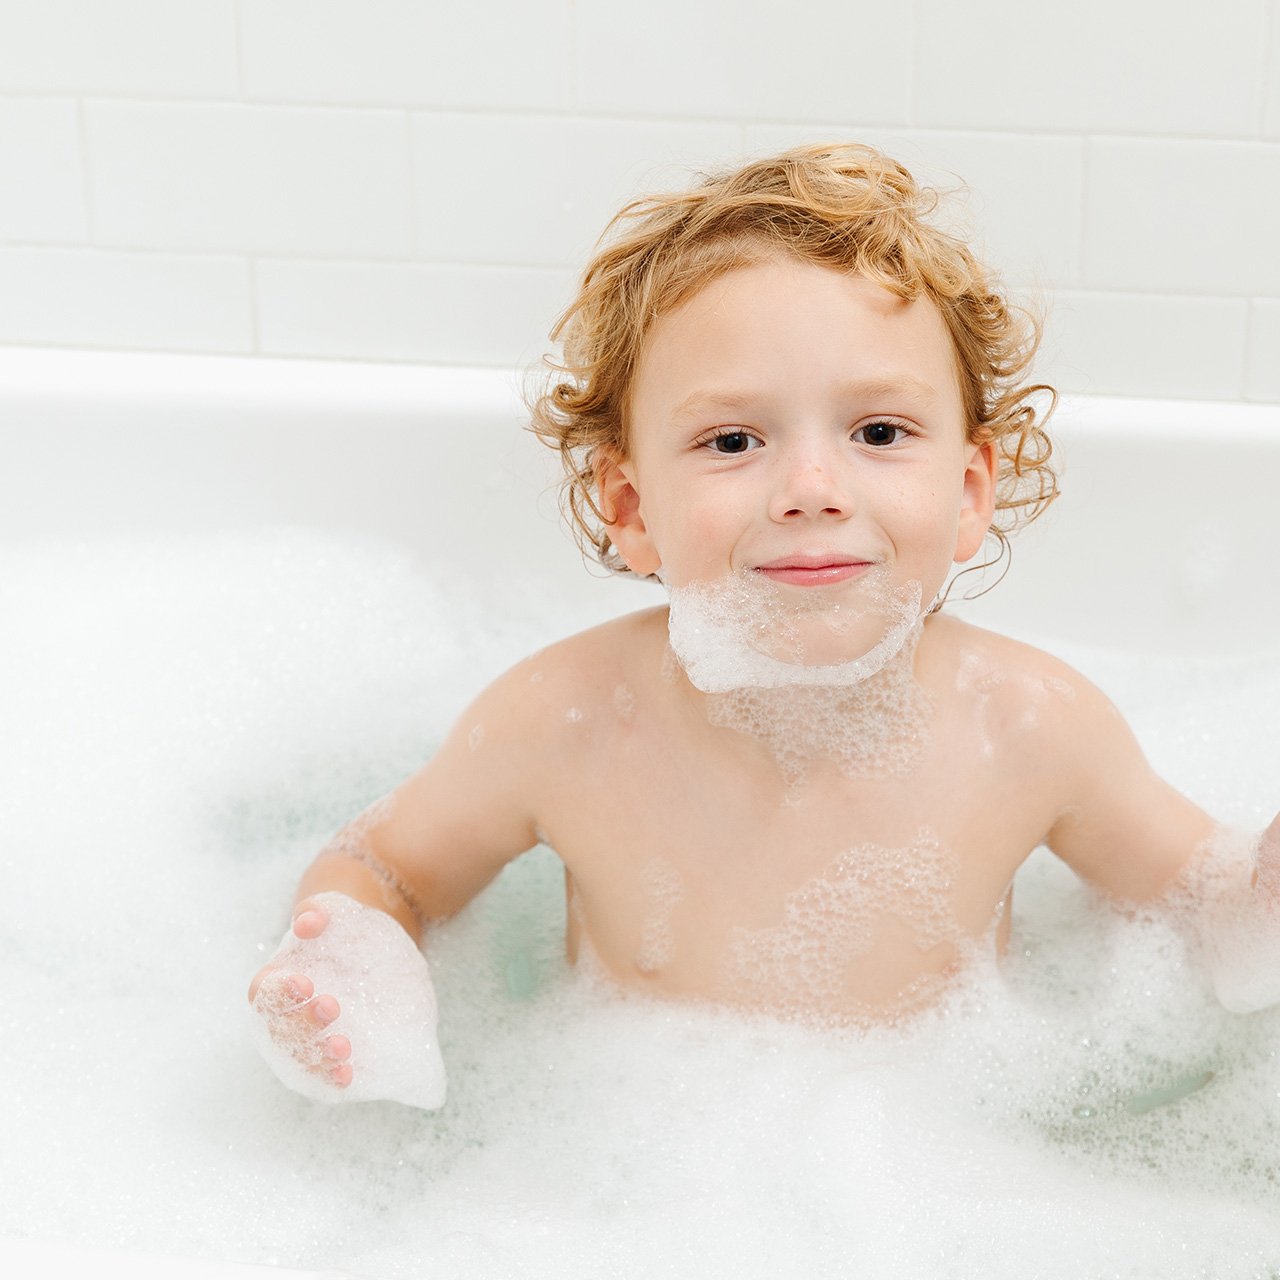 A boy is smiling with foam in his mouth in the bath tub